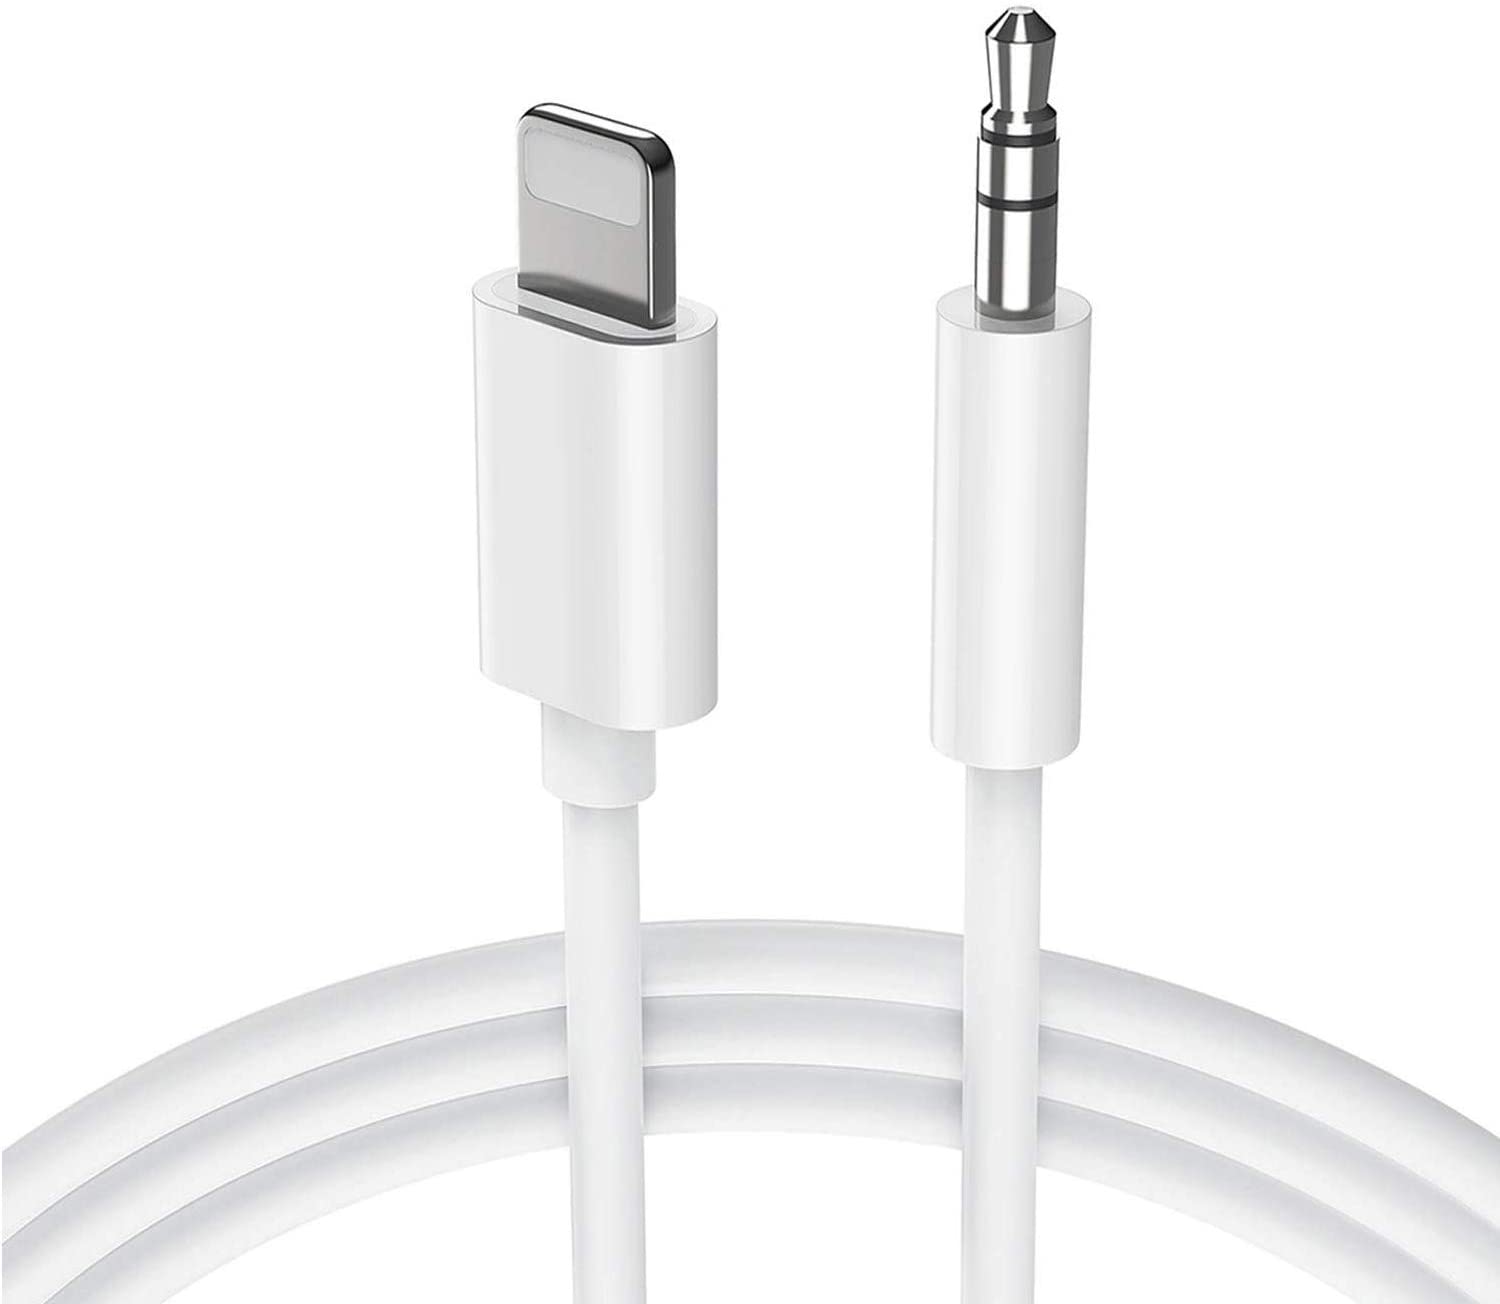 [Apple MFi Certified] AUX Cord for iPhone 11, Lightning to 3.5 mm Headphone Jack Adapter, 3.5mm to Lightning Adapter, Aux Adapter, Headphone Jack Adapter, Compatible for iPhone 11 XS XR X 7 7P 8 8P - image 1 of 9